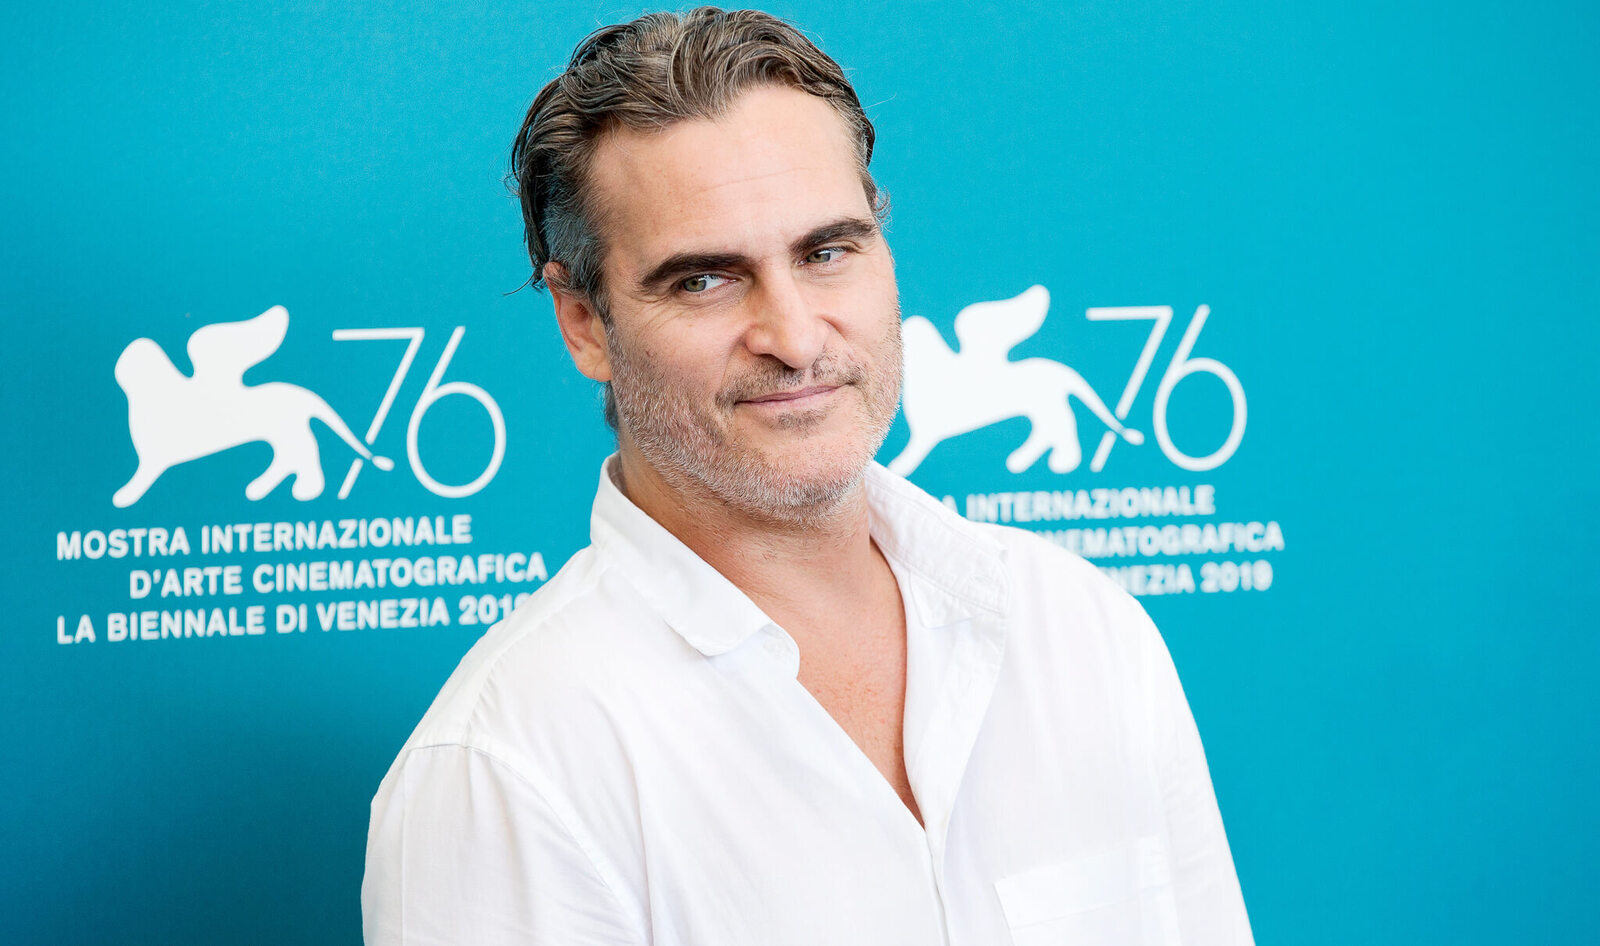 Joaquin Phoenix Speaks Out About Importance of Animal Law